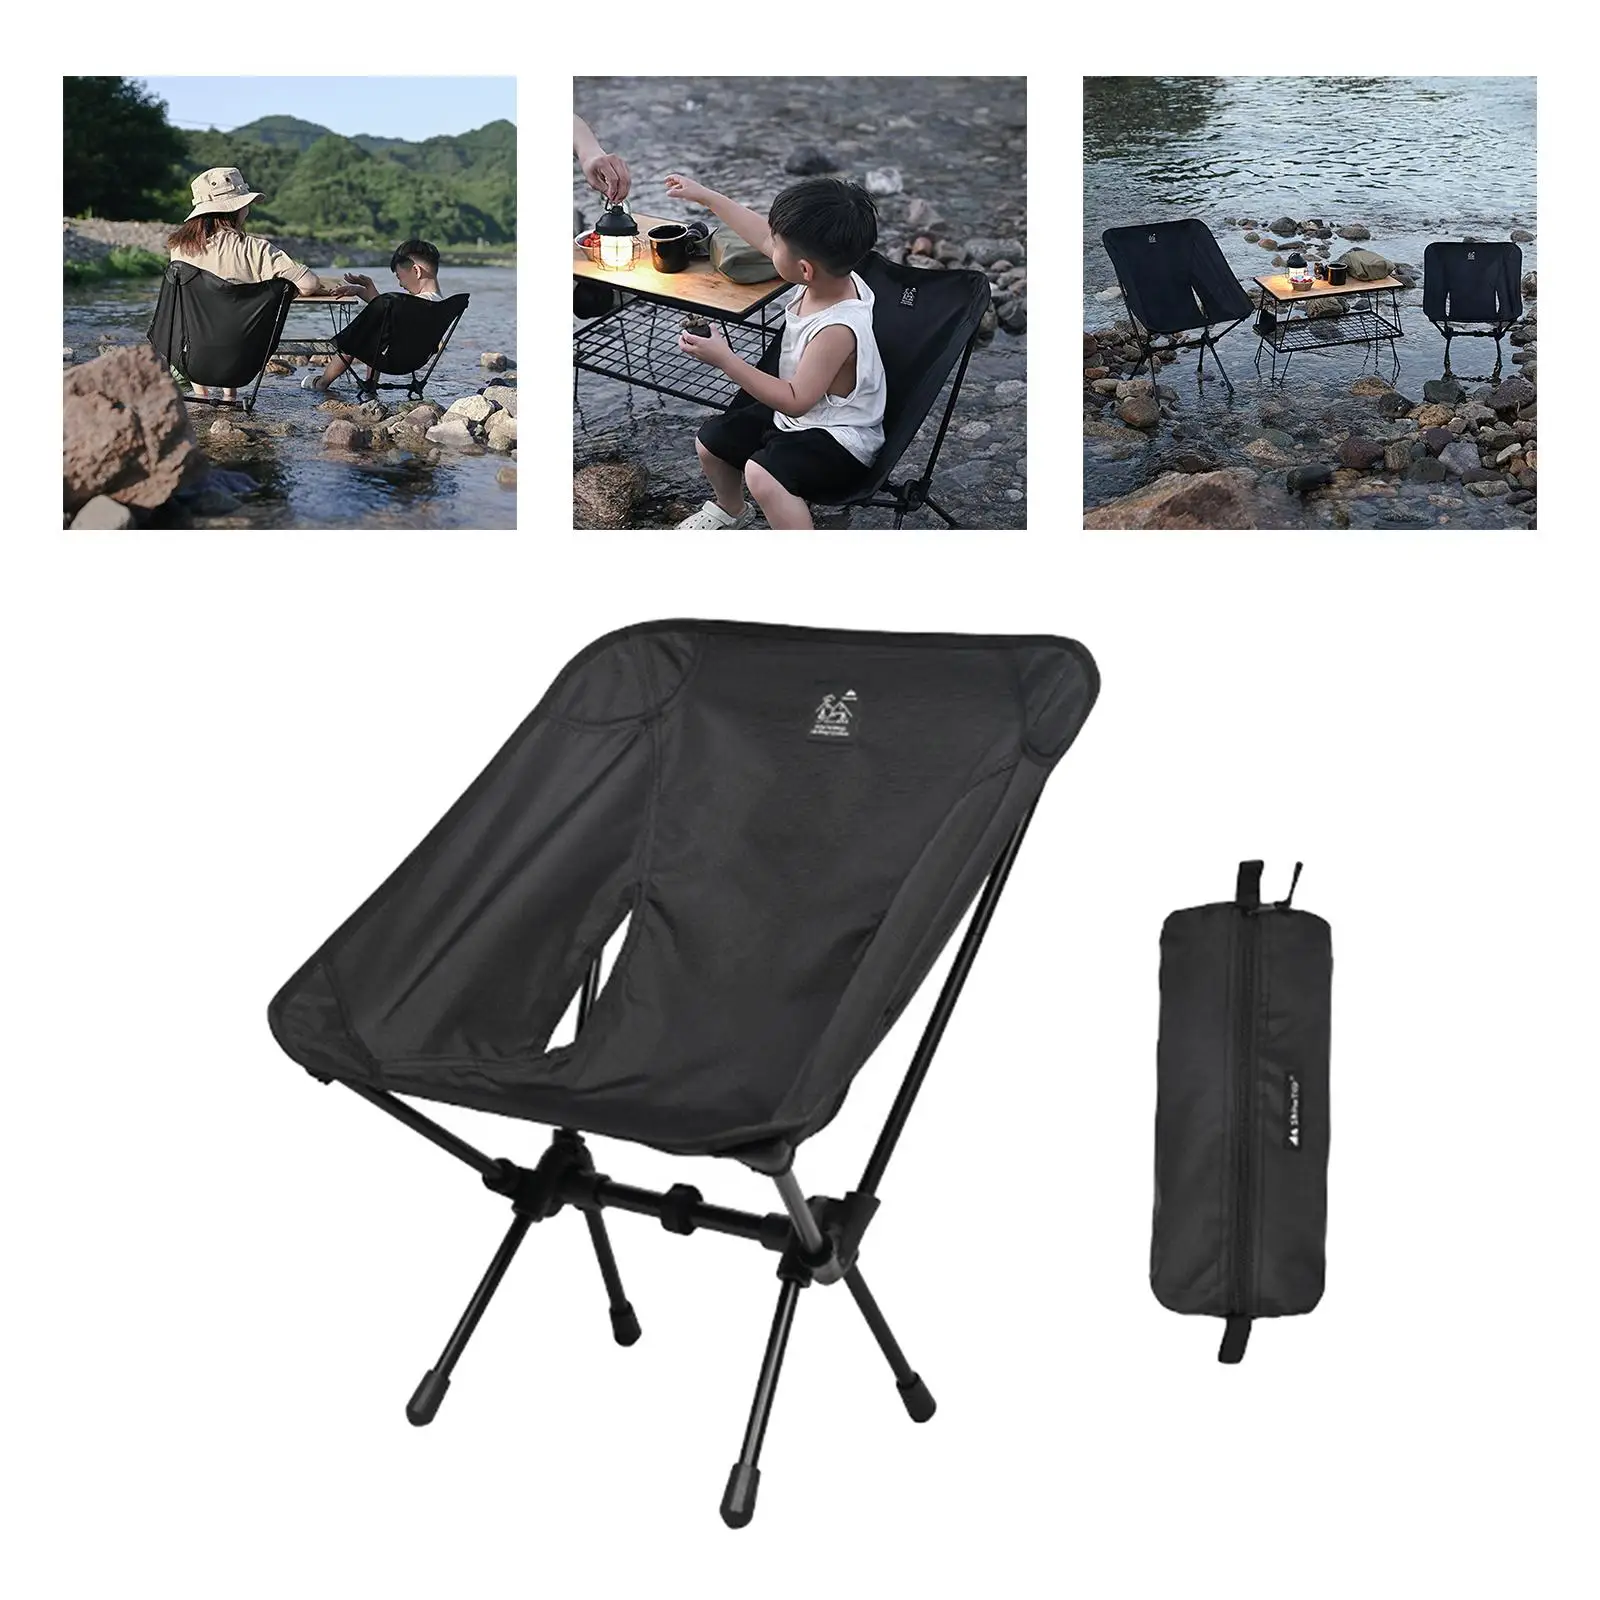 Heavy Duty Outdoor Camping Armchair W/Storage Pouch Seat Portable Folding Moon Chair for Backyard Barbecue Beach Fishing Picnic